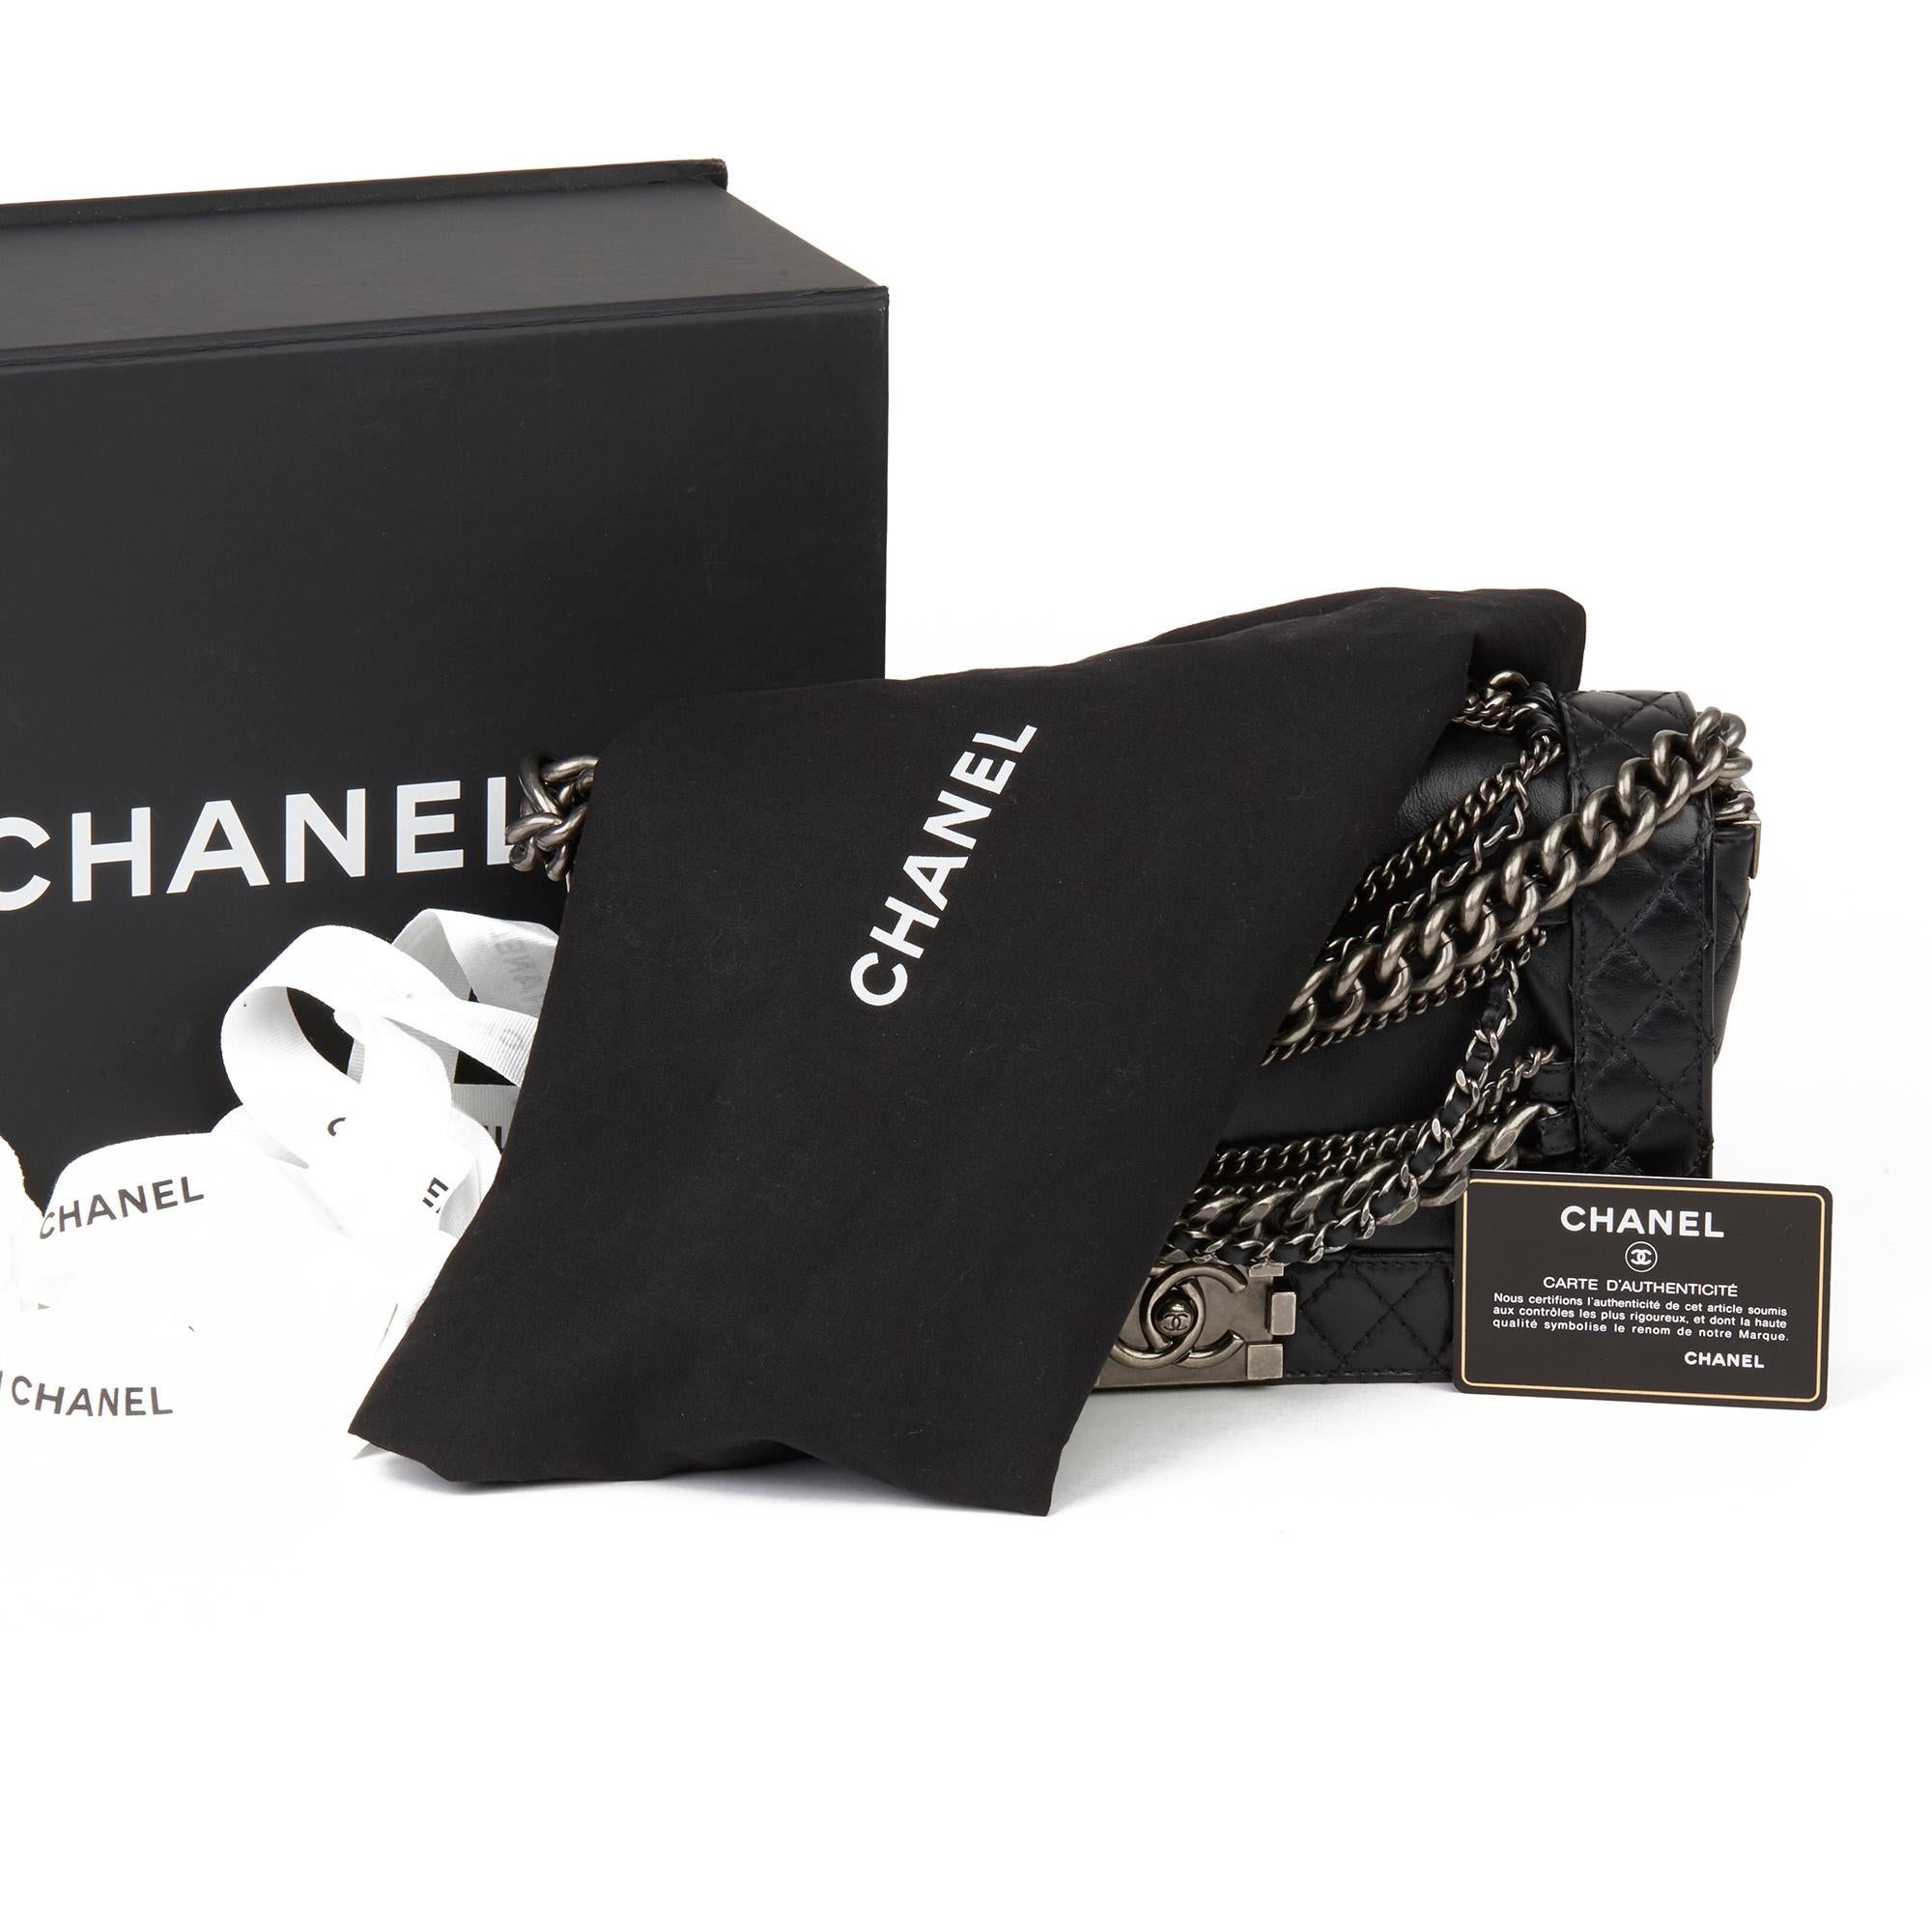 CHANEL
Black Quilted Calfskin Leather Enchained Medium Le Boy Reverso

Xupes Reference: HB3432
Serial Number: 18539774
Age (Circa): 2014
Accompanied By: Chanel Dust Bag, Box, Authenticity Card
Authenticity Details: Authenticity Card, Serial Sticker